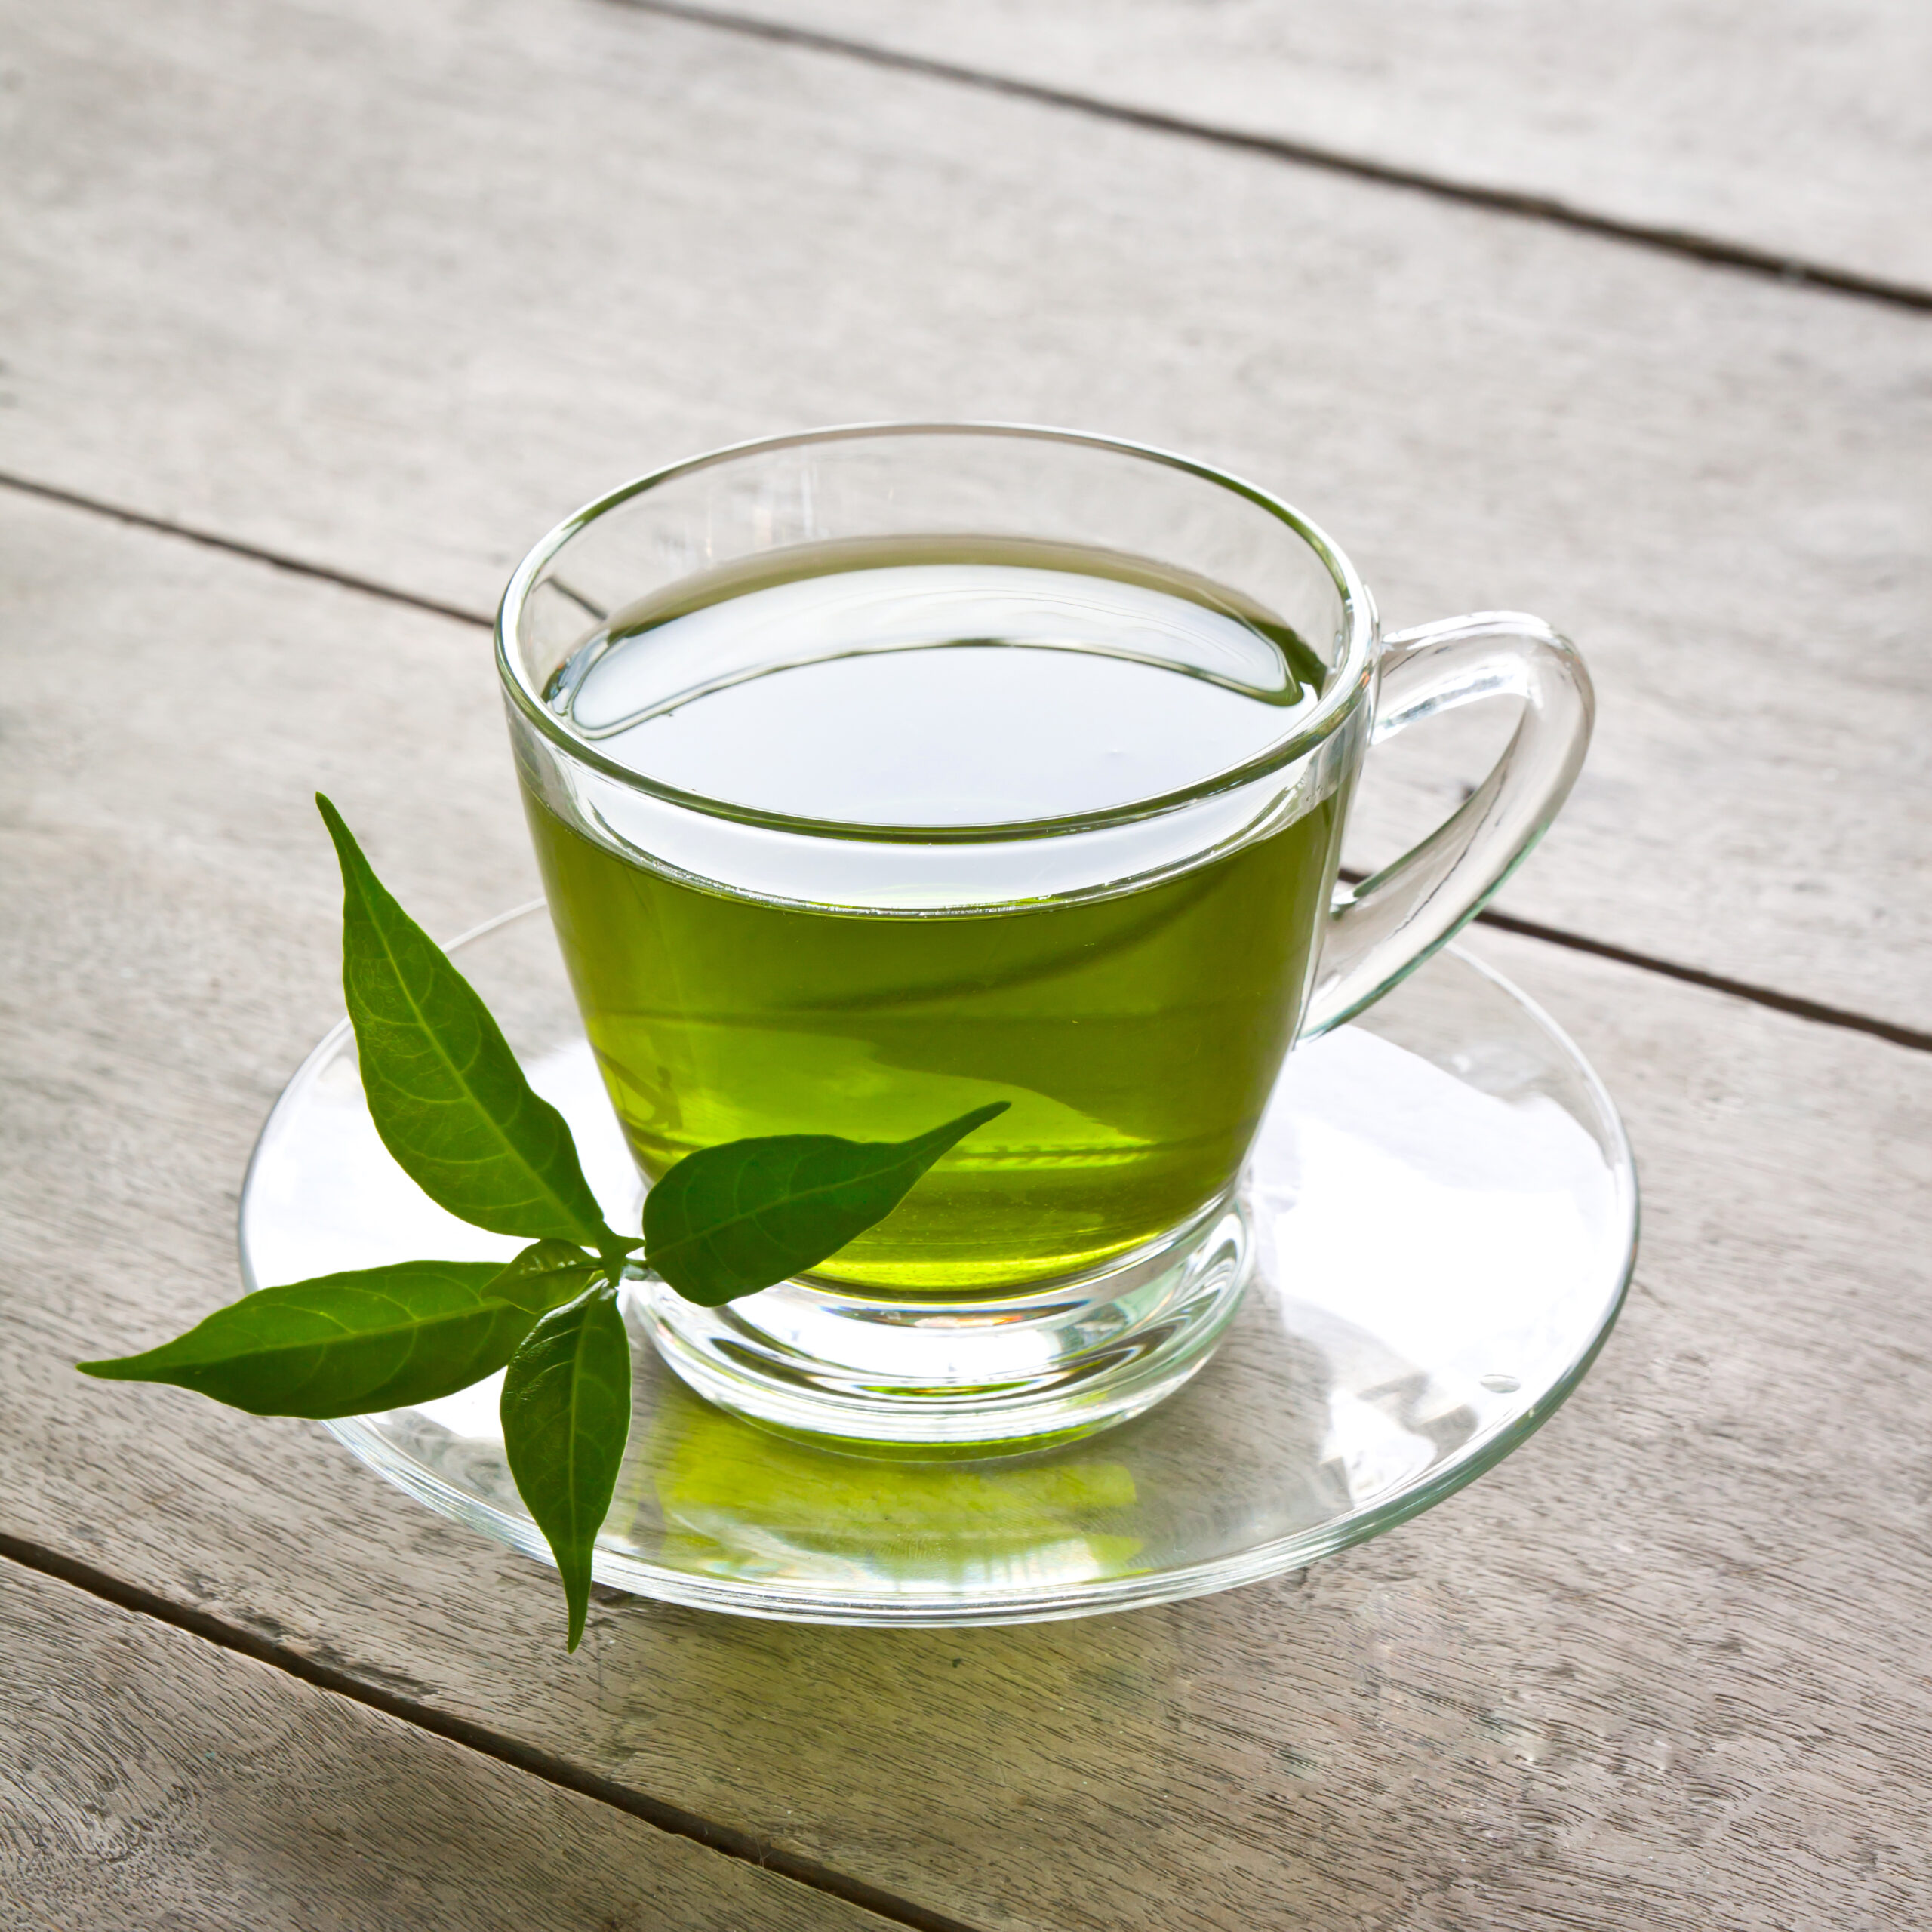 Why is Liptons green tea helpful for losing weight